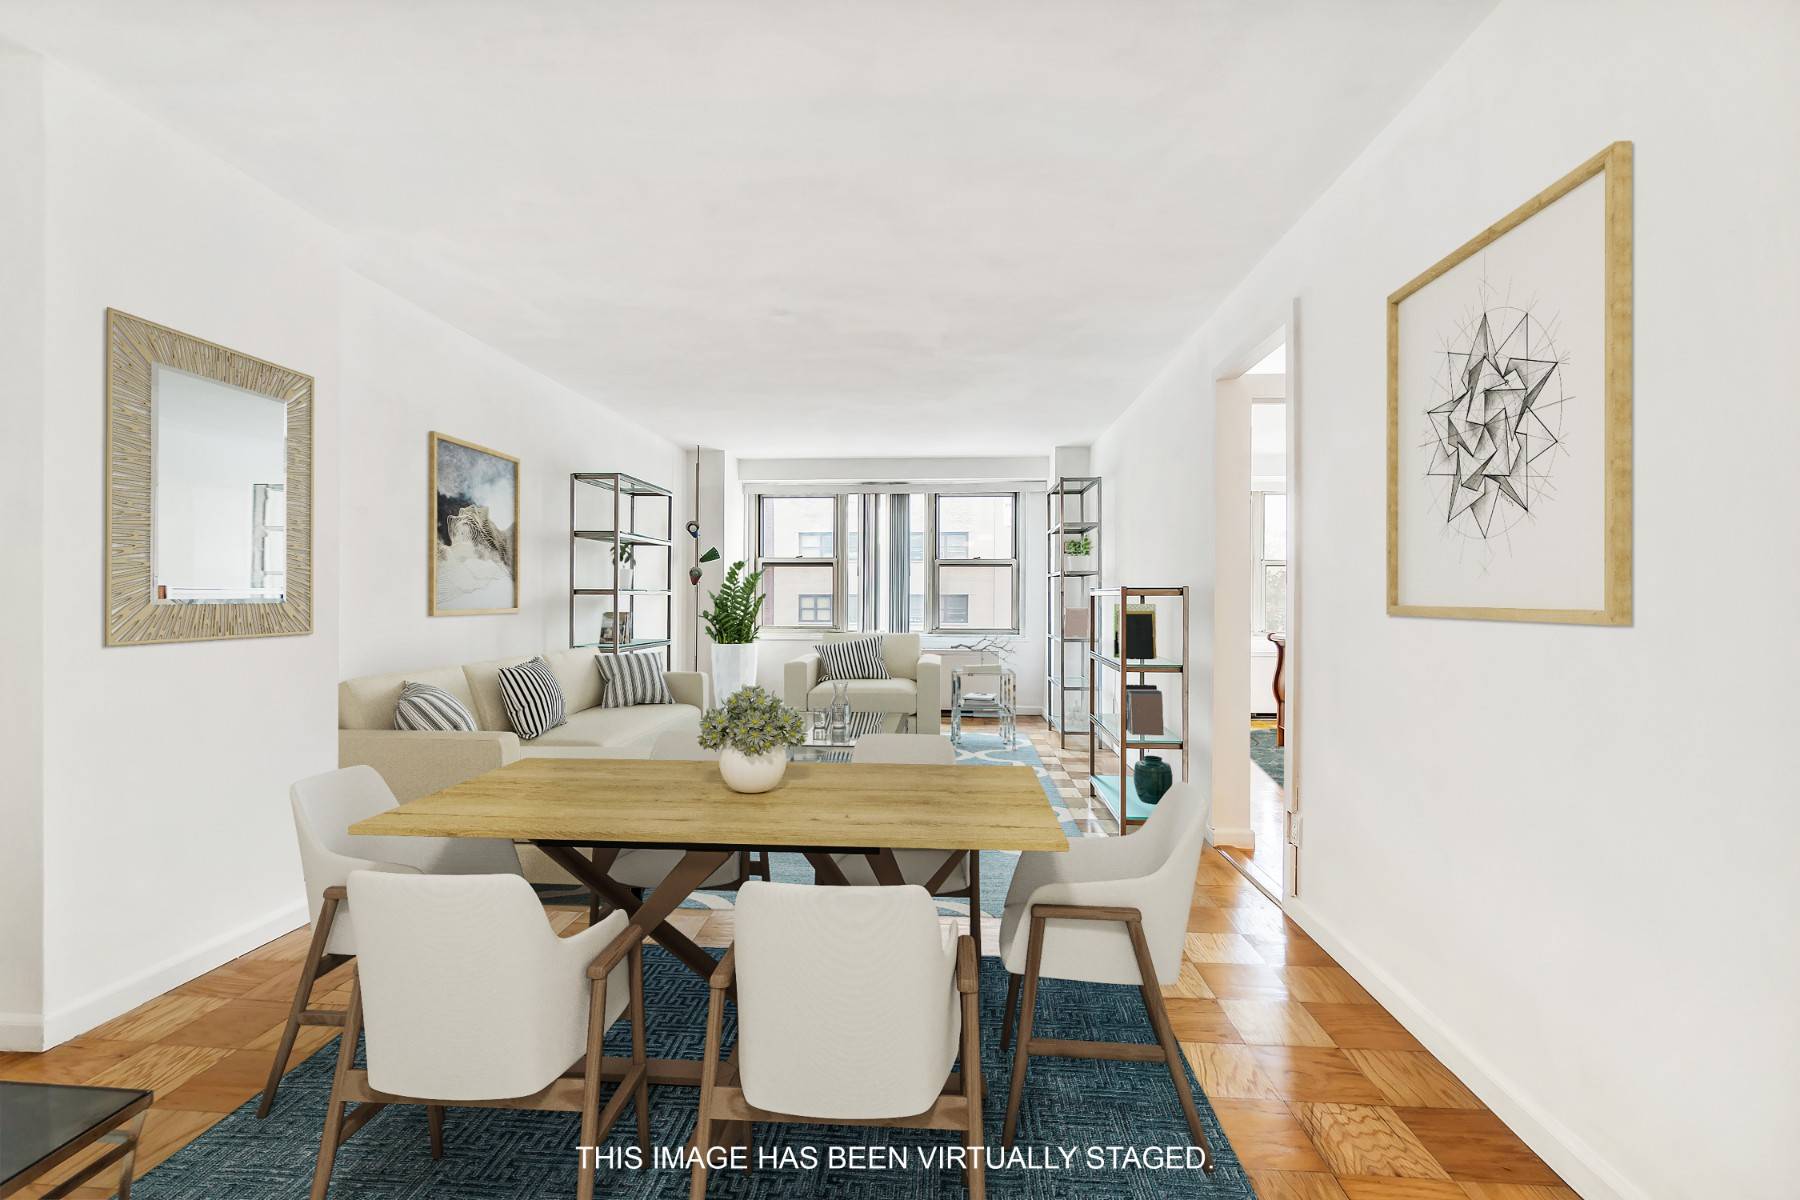 Located in the Heart of Kips Bay, this expansive convertible 2 bedroom is quite impressive.